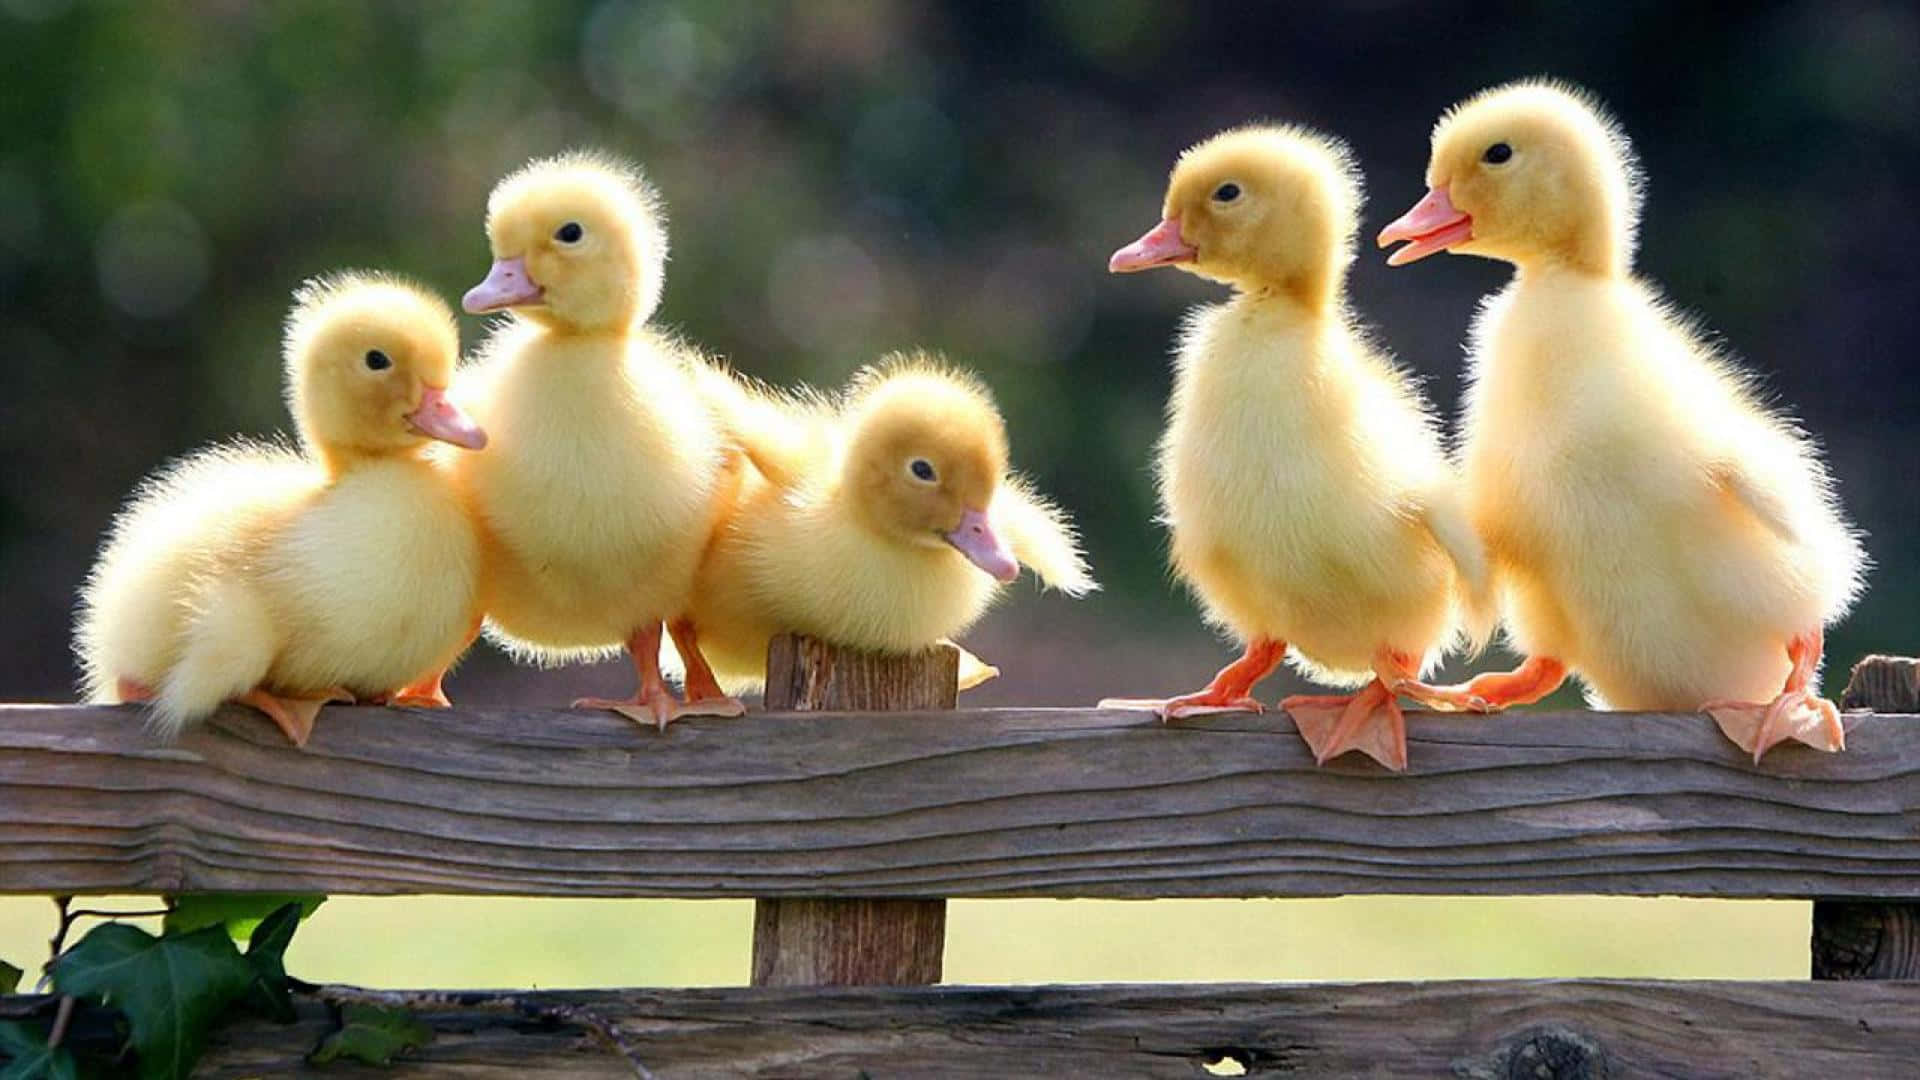 This Cute And Cuddly Duck Will Keep You Company! Background